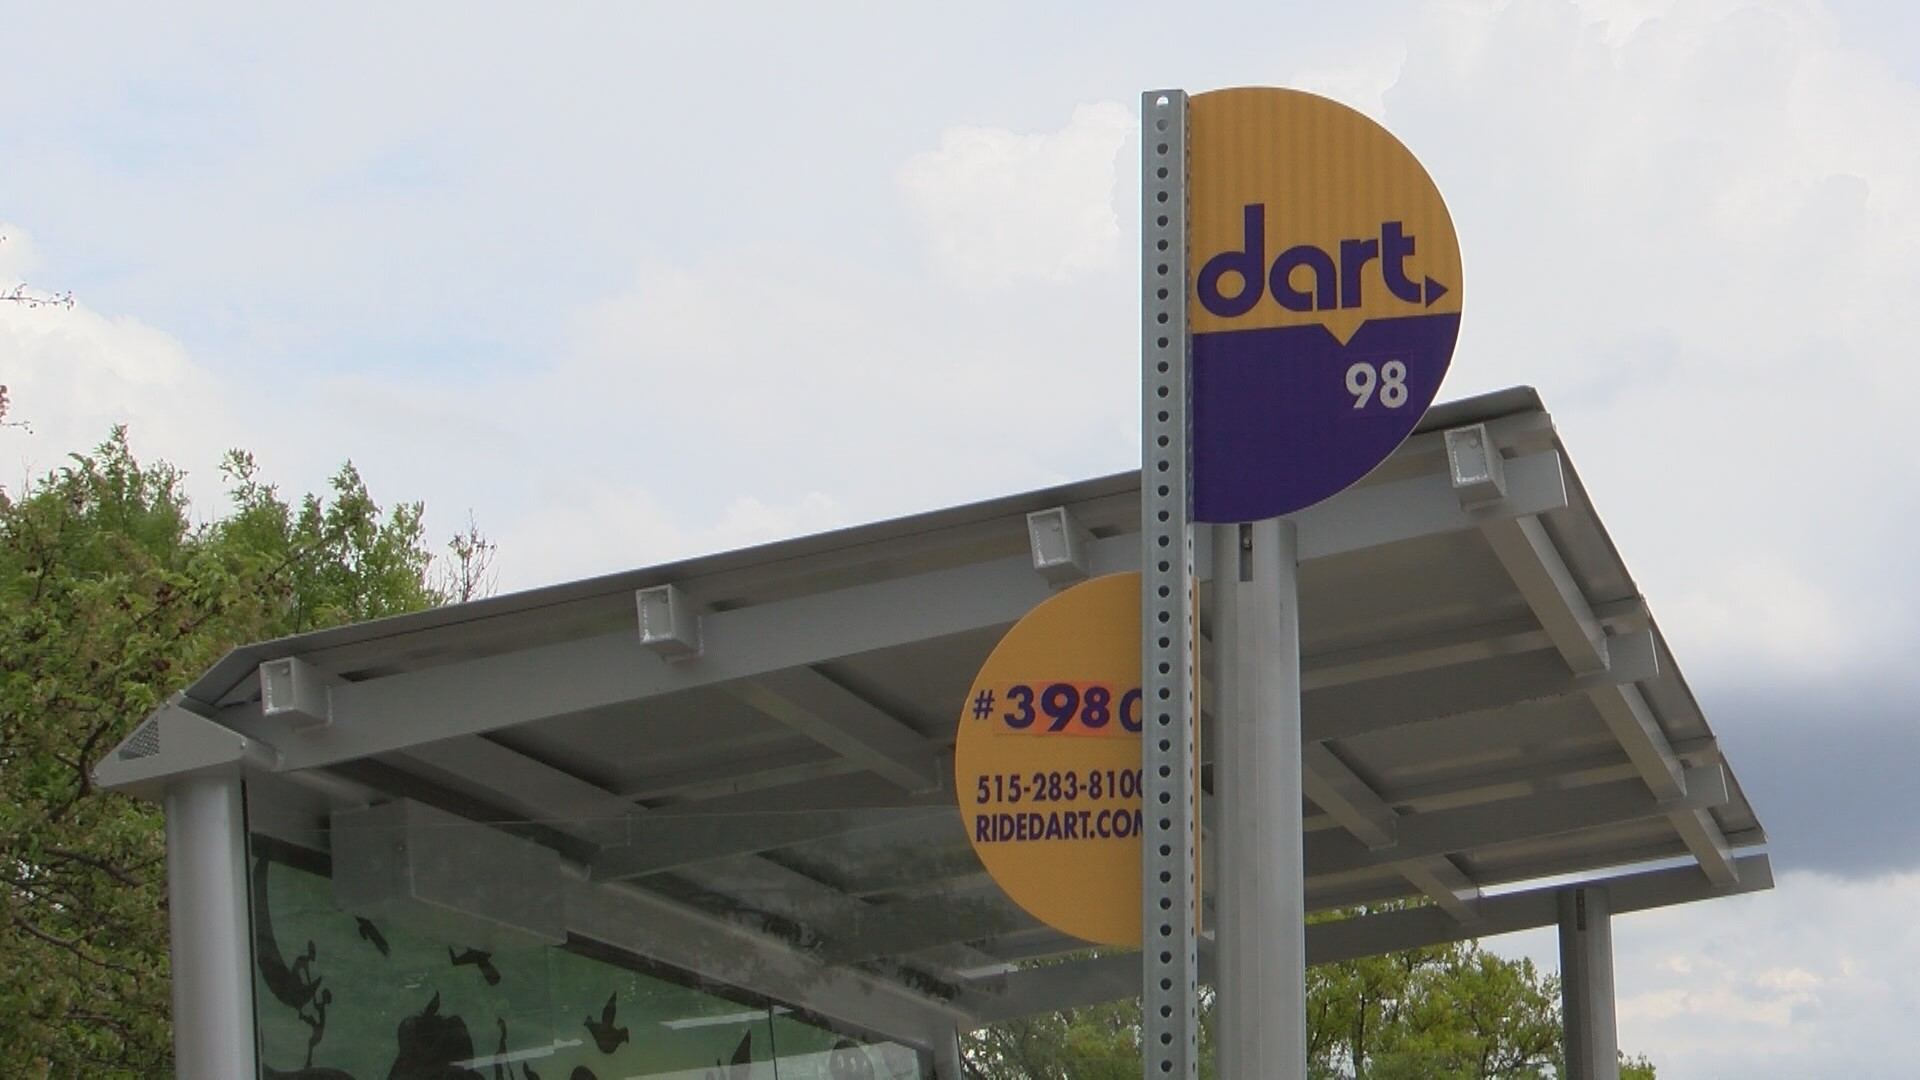 Des Moines Refugee Support is asking the community to help purchase bus passes for kids who need to use DART to get to school.